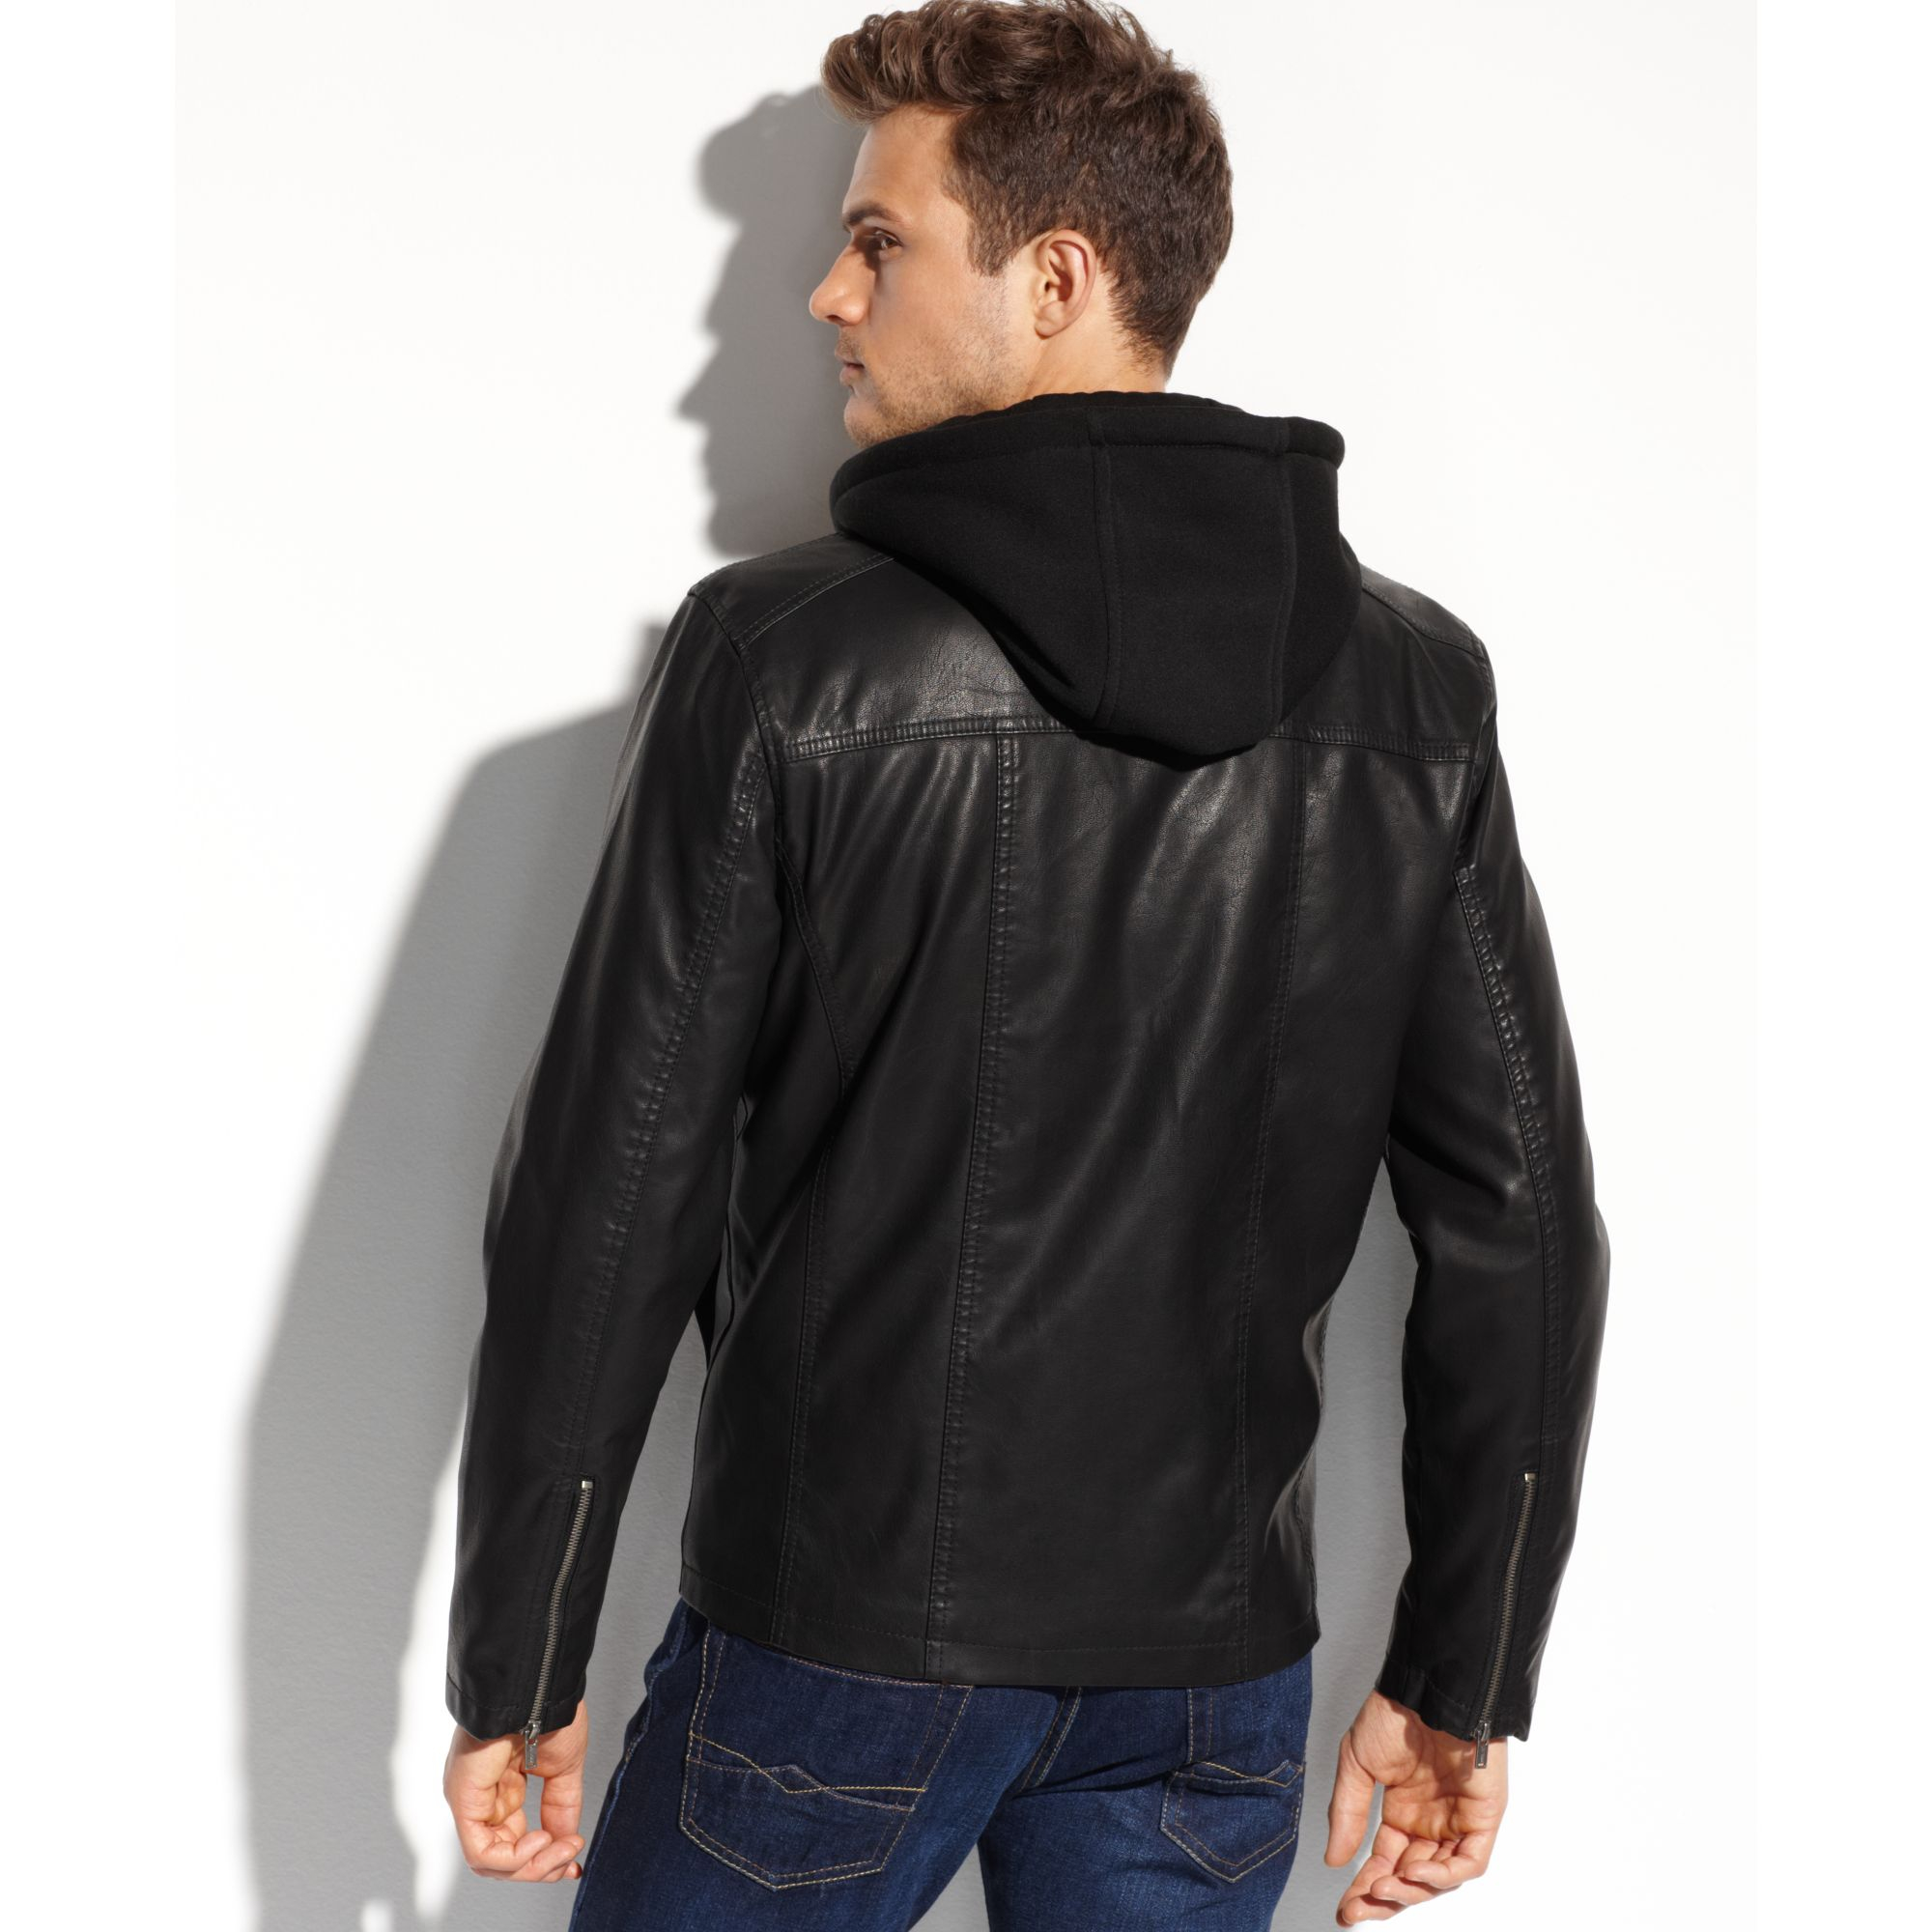 Guess Coats Faux Leather Fourpocket Hooded Jacket in Black for Men - Lyst